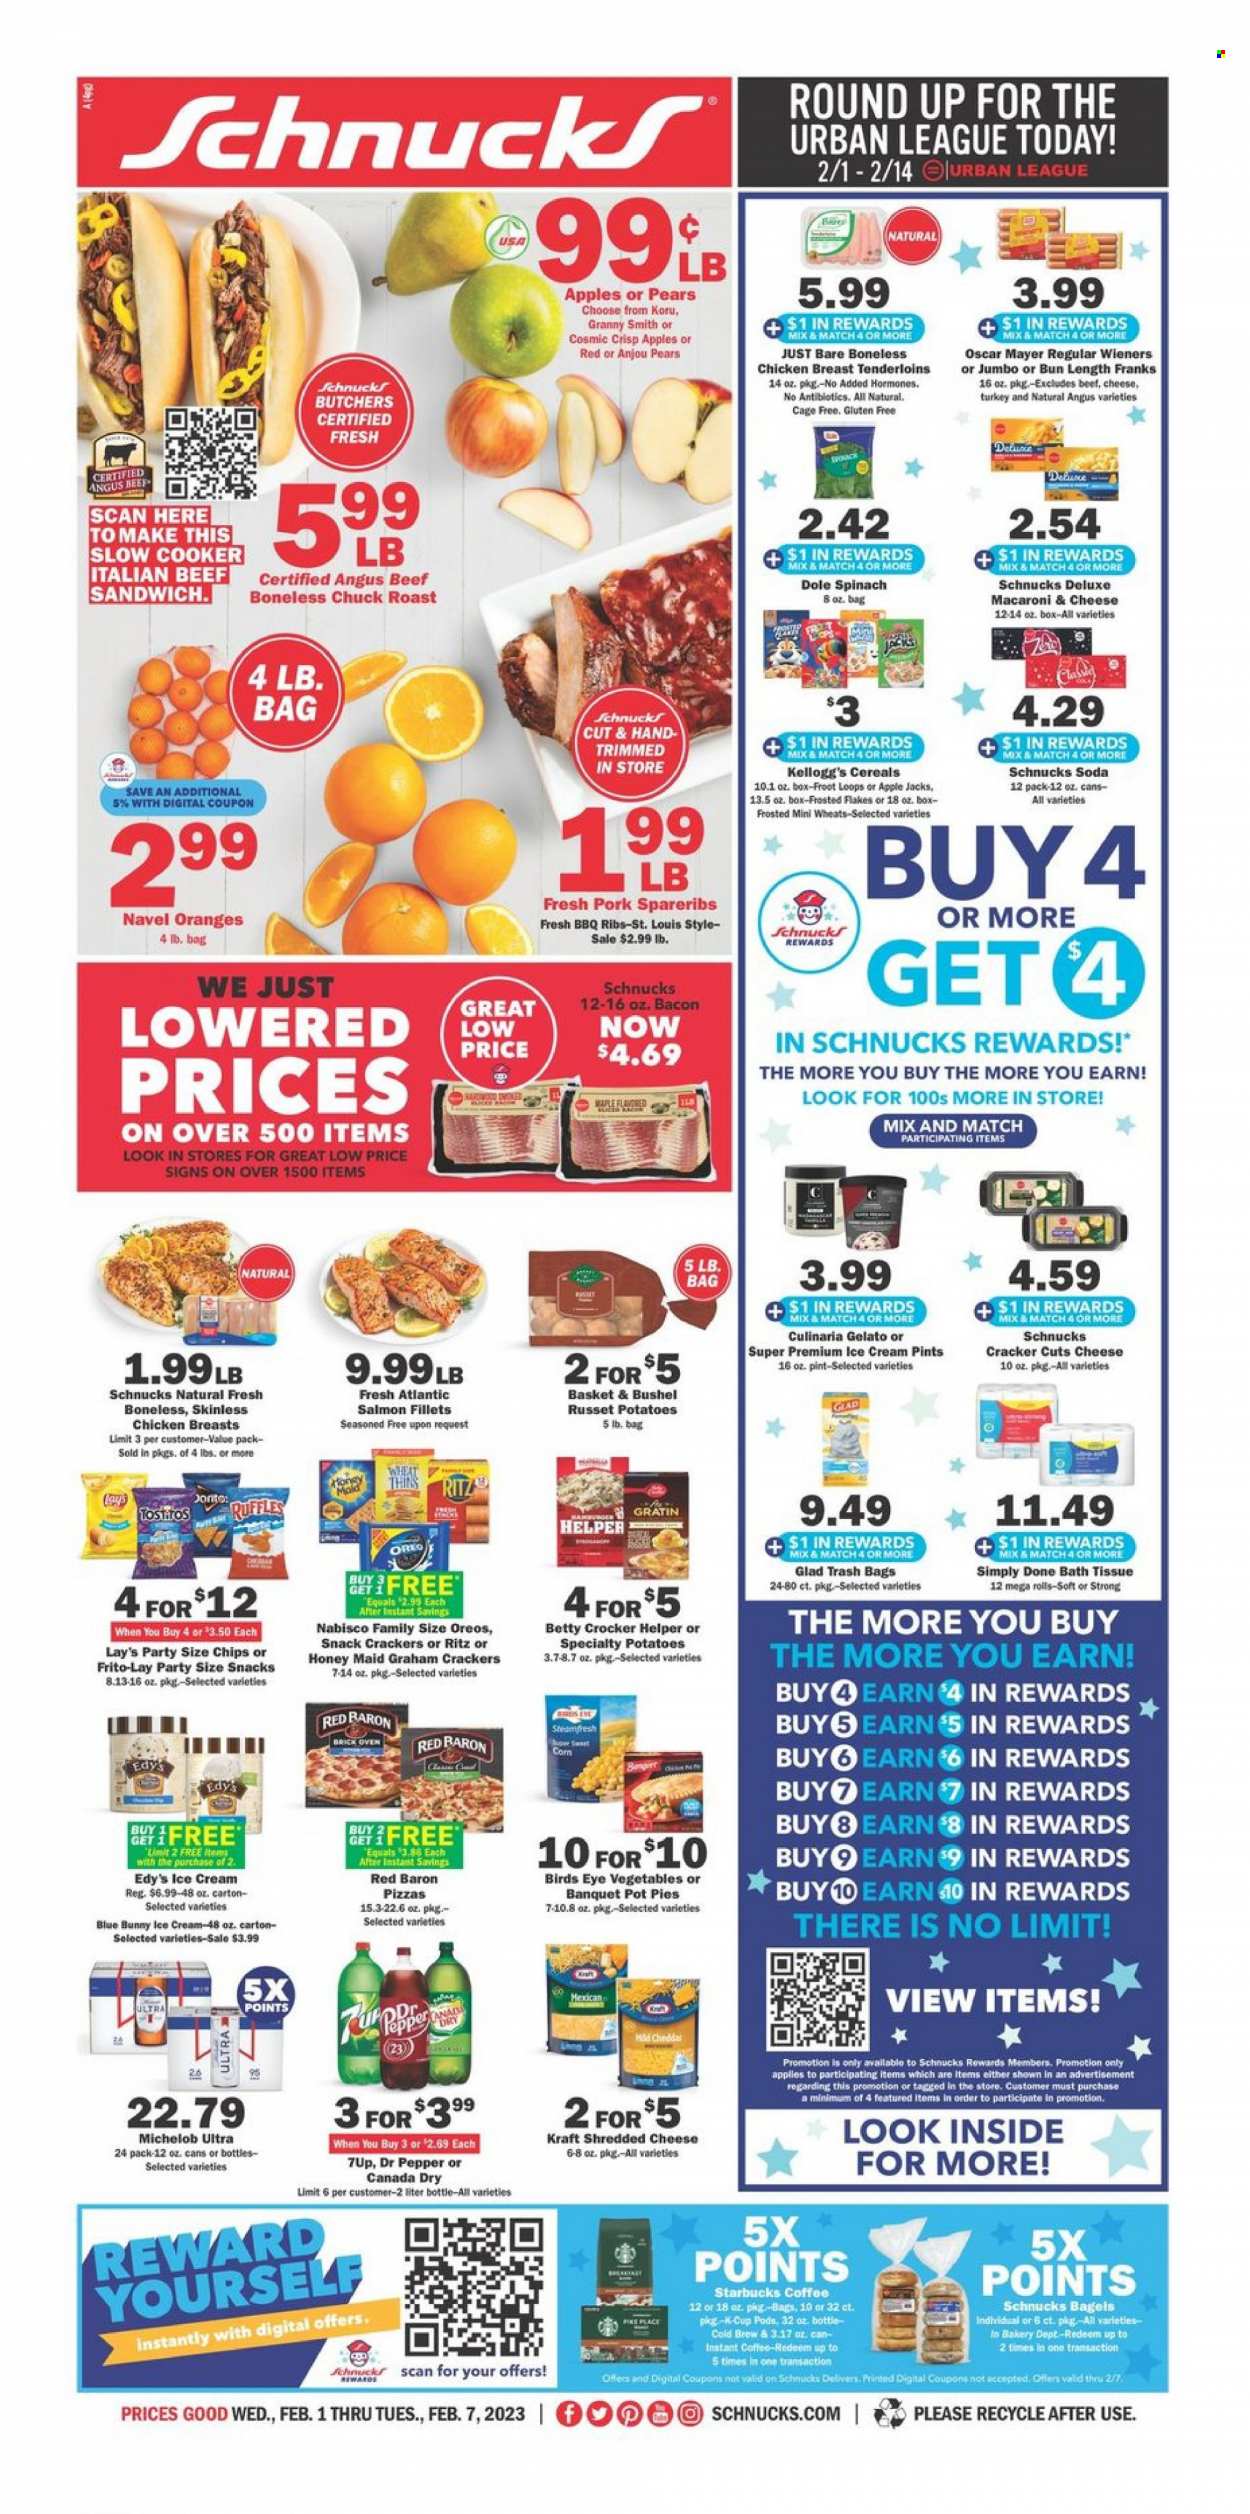 thumbnail - Schnucks Flyer - 02/01/2023 - 02/07/2023 - Sales products - bagels, pot pie, russet potatoes, spinach, potatoes, Dole, pears, oranges, Granny Smith, cod, salmon, salmon fillet, macaroni & cheese, pizza, hamburger, Bird's Eye, Kraft®, bacon, Oscar Mayer, shredded cheese, cage free eggs, ice cream, gelato, Blue Bunny, Red Baron, graham crackers, snack, crackers, Kellogg's, RITZ, chips, Lay’s, Thins, Frito-Lay, Ruffles, Tostitos, cereals, Frosted Flakes, Honey Maid, Canada Dry, Dr. Pepper, 7UP, soda, coffee, Starbucks, instant coffee, coffee capsules, K-Cups, beer, chicken breasts, beef meat, chuck roast, ribs, pork spare ribs, bath tissue, Michelob, navel oranges. Page 1.